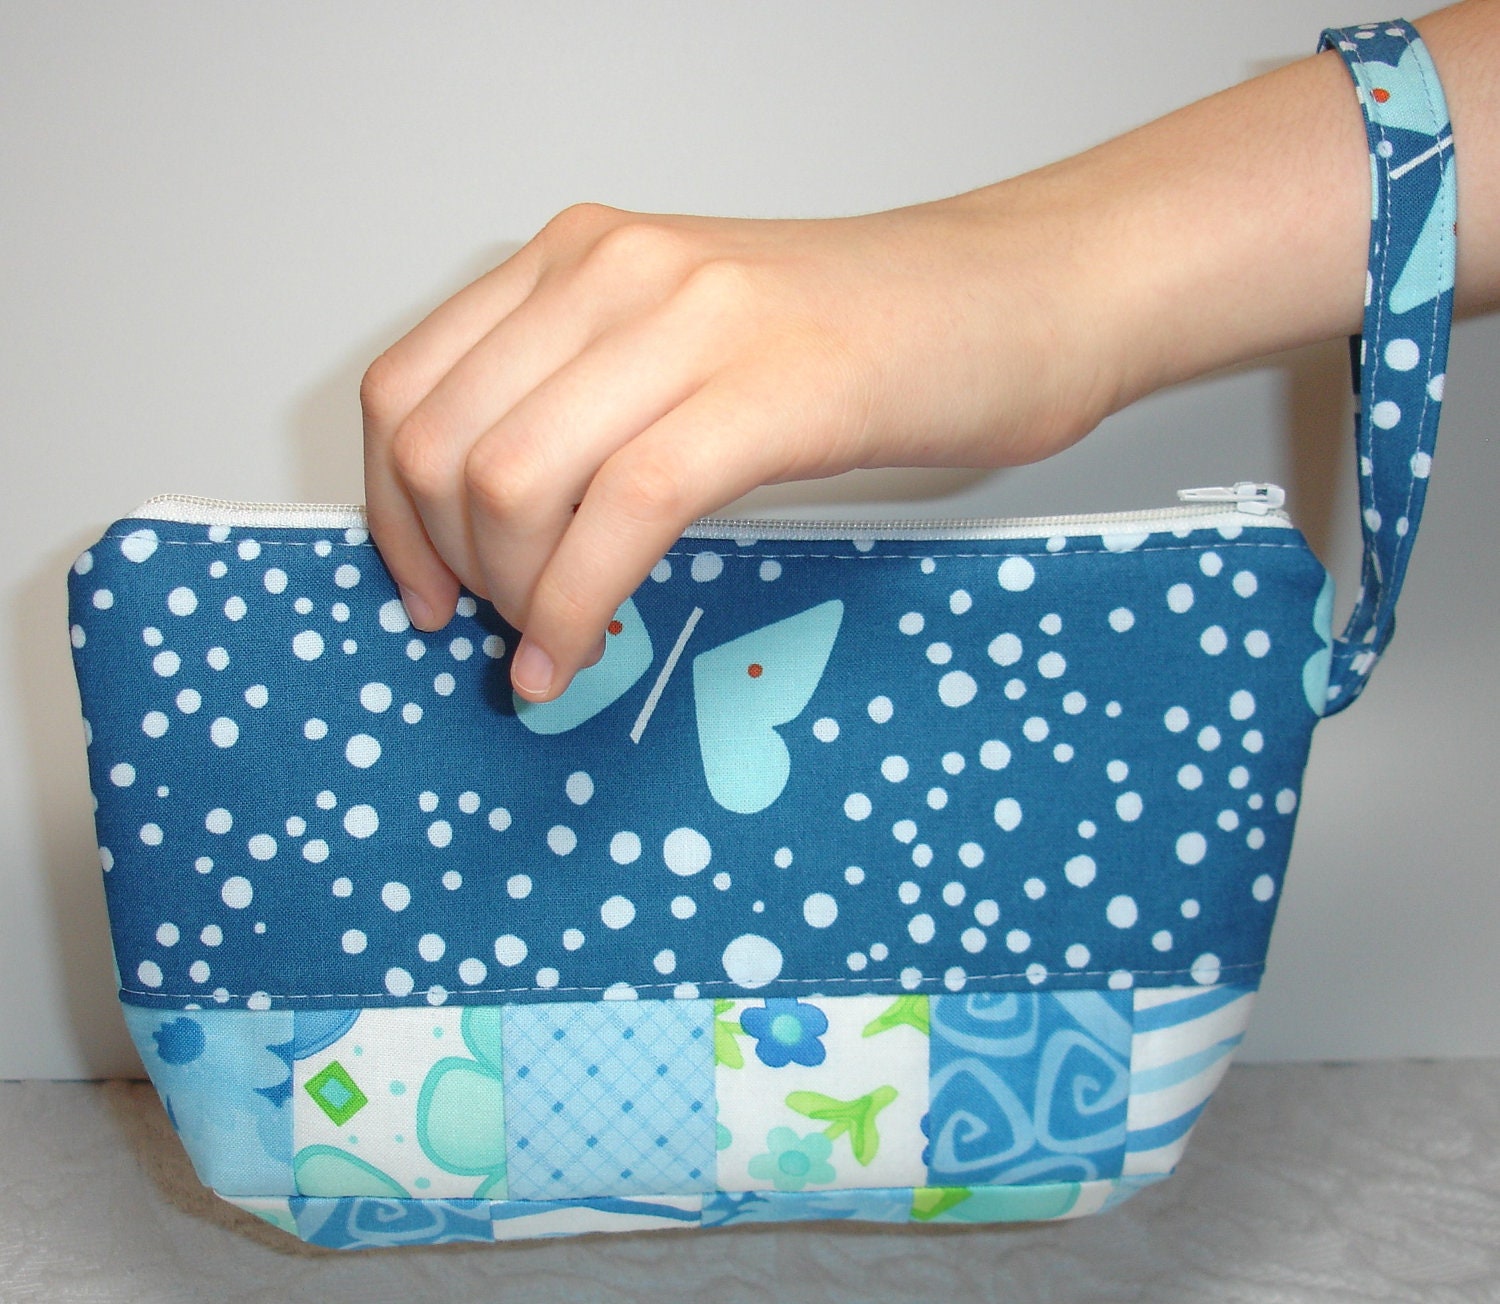 Wristlet Zippered Clutch Purse Bag Quilted - Light Blue, Navy, White - Butterfly - KeriQuilts